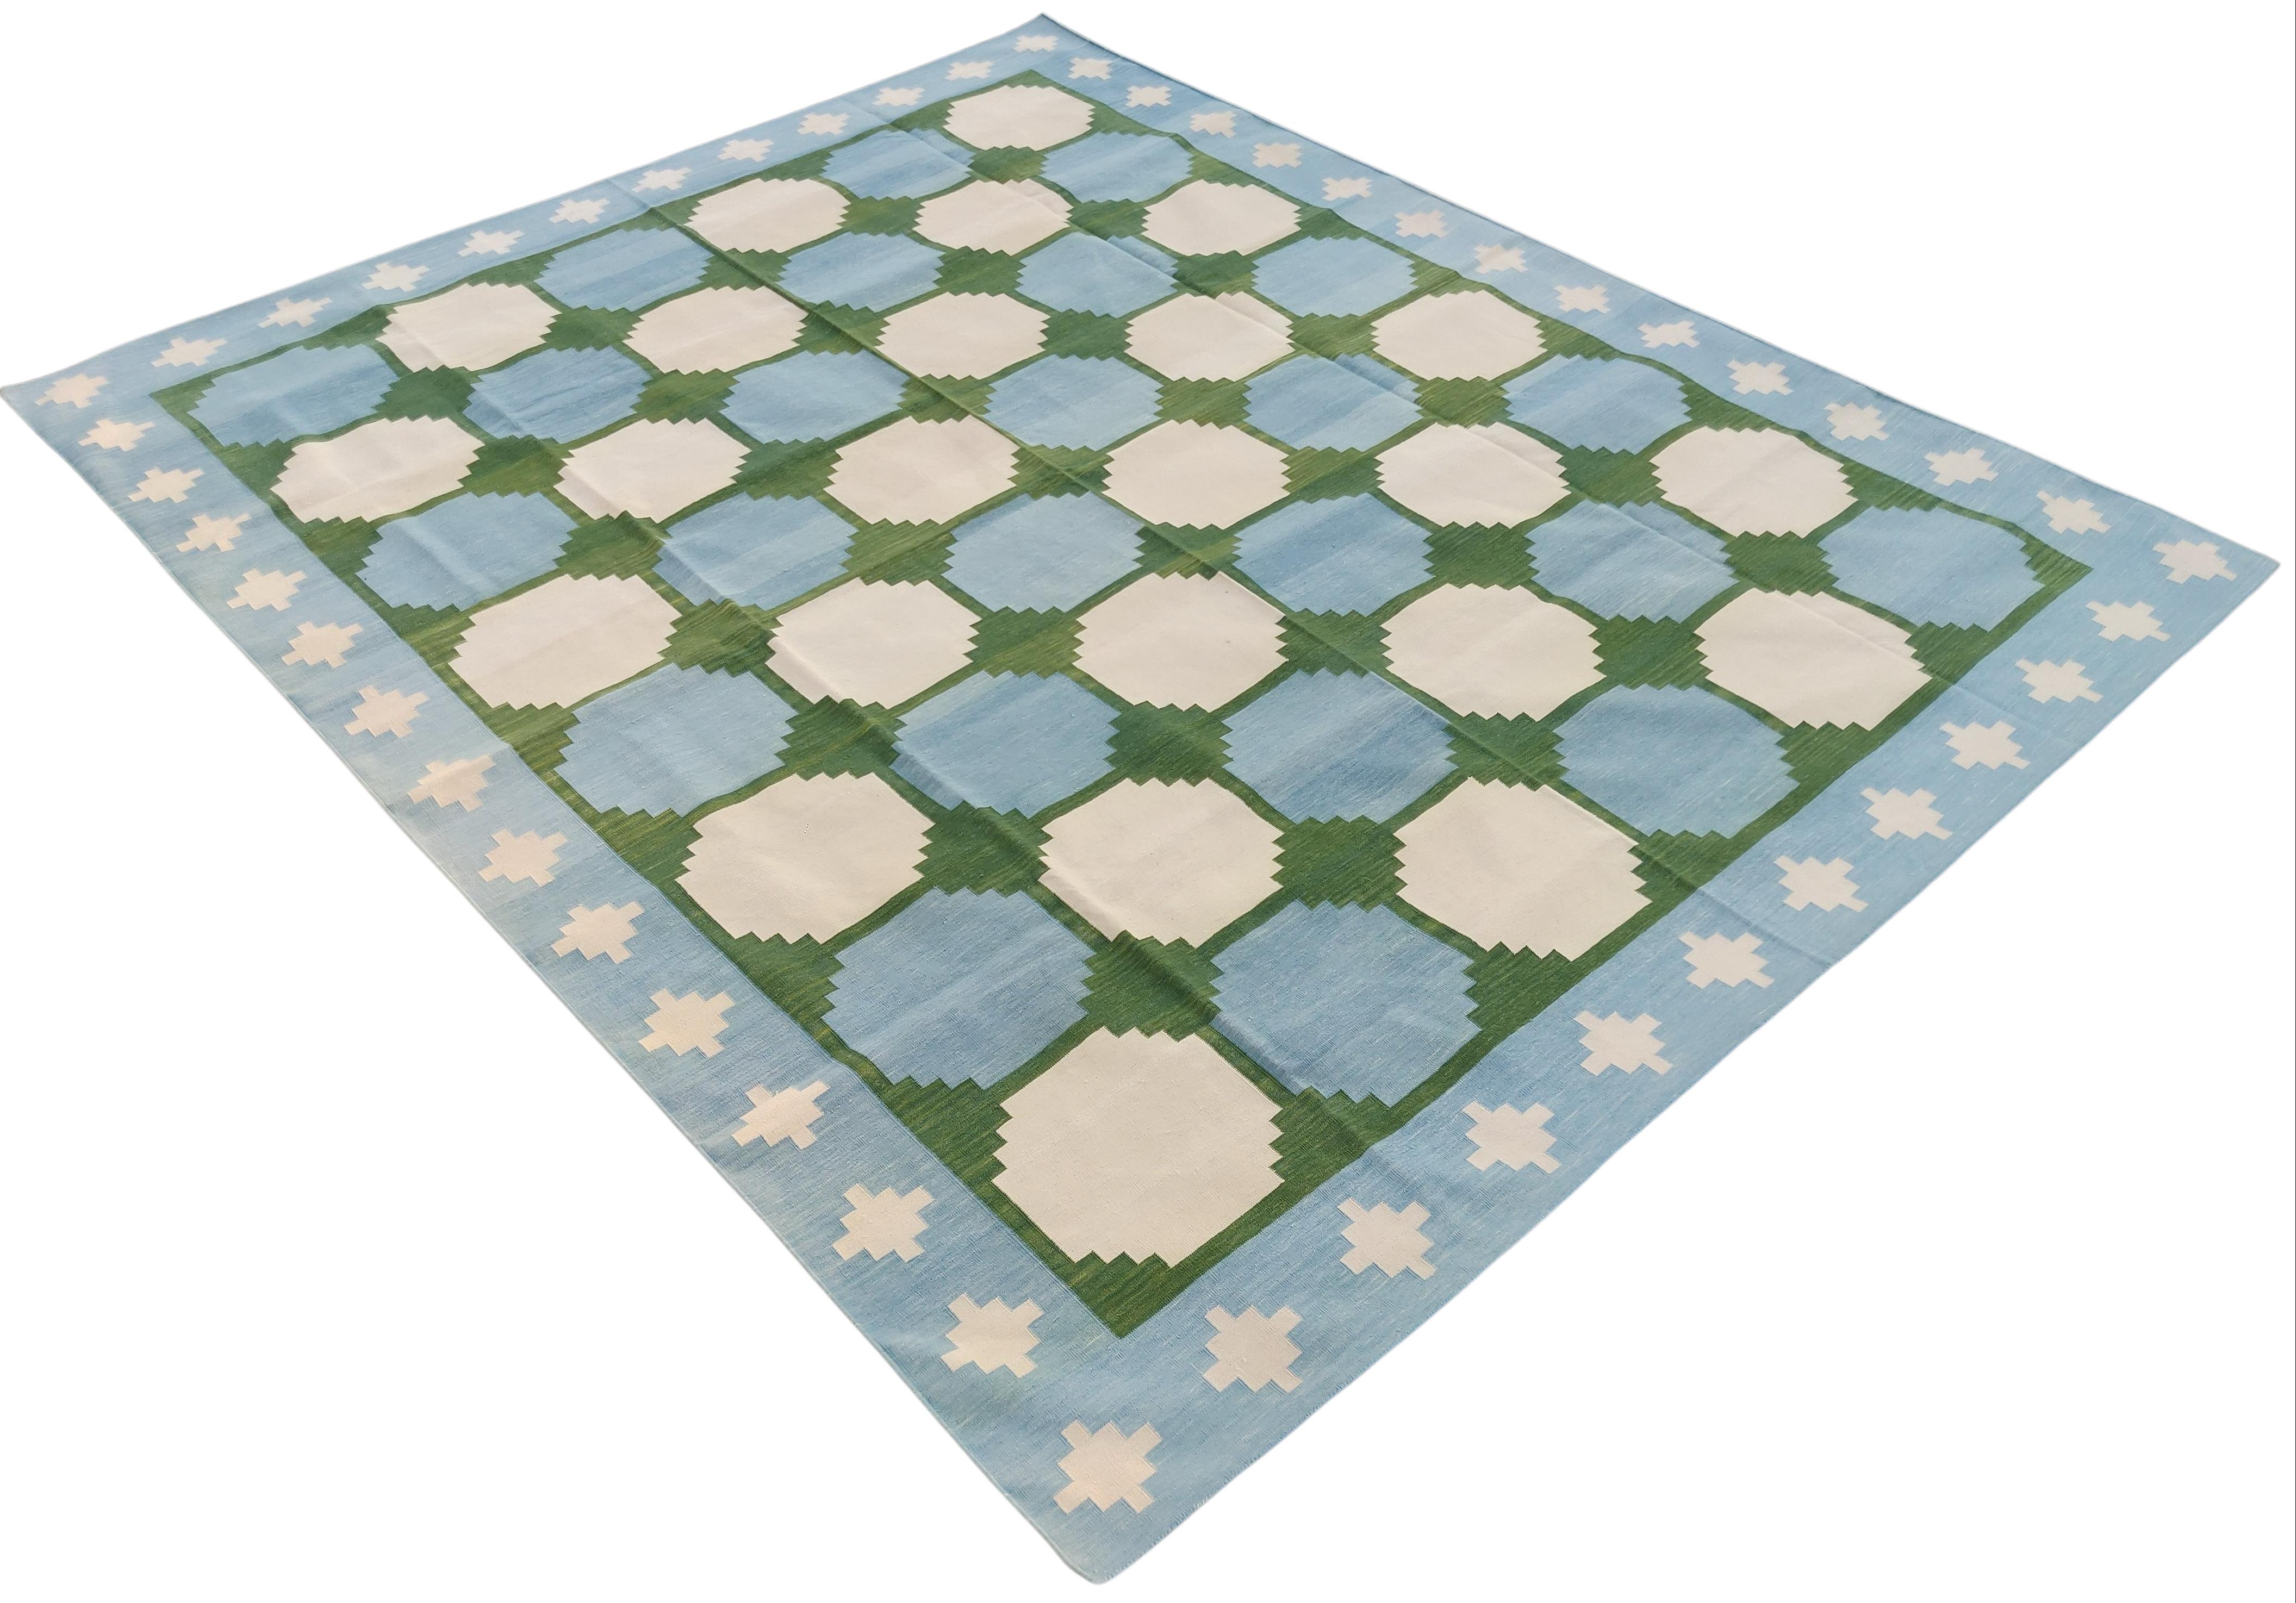 Cotton Natural Vegetable Dyed Forest Green , Sky Blue And Cream Tile Patterned Rug-10' 6